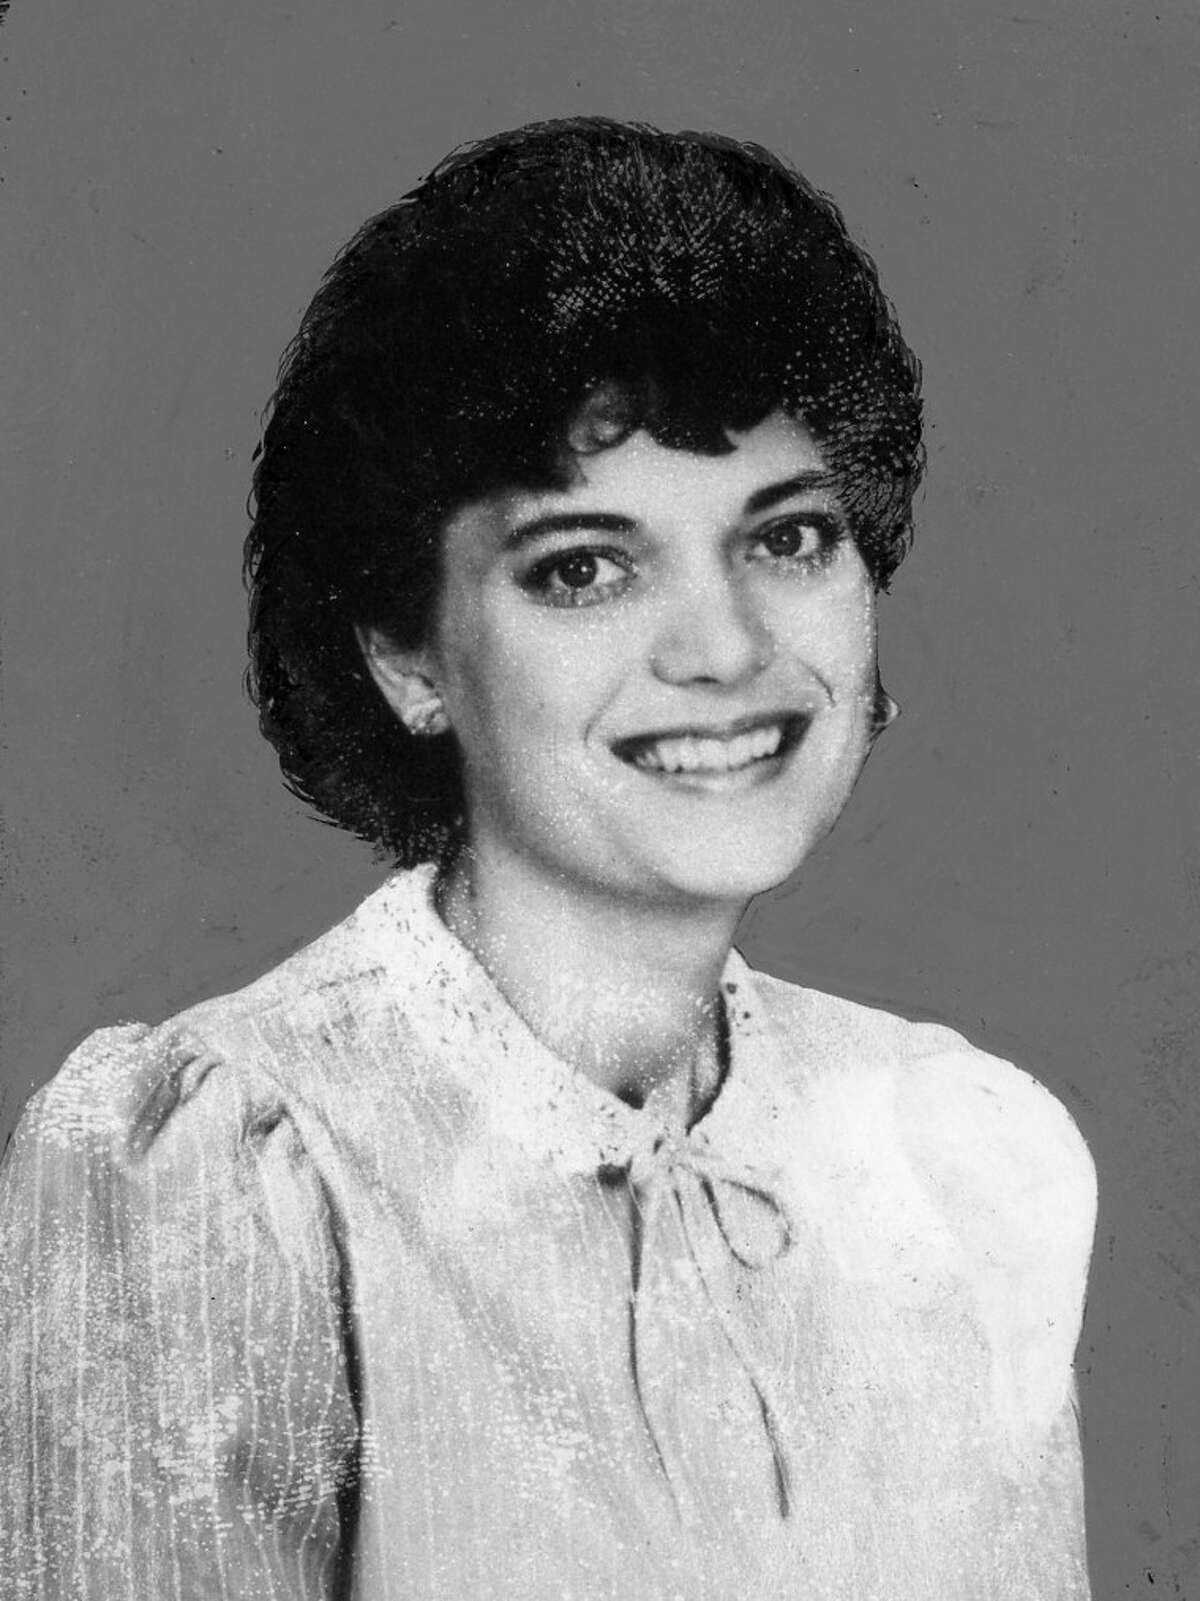 Beth Yvette Wilburn, 25, was among the victims of a triple slaying at a League City auto repair shop on Nov. 2, 1983. She was a co-owner of the shop.